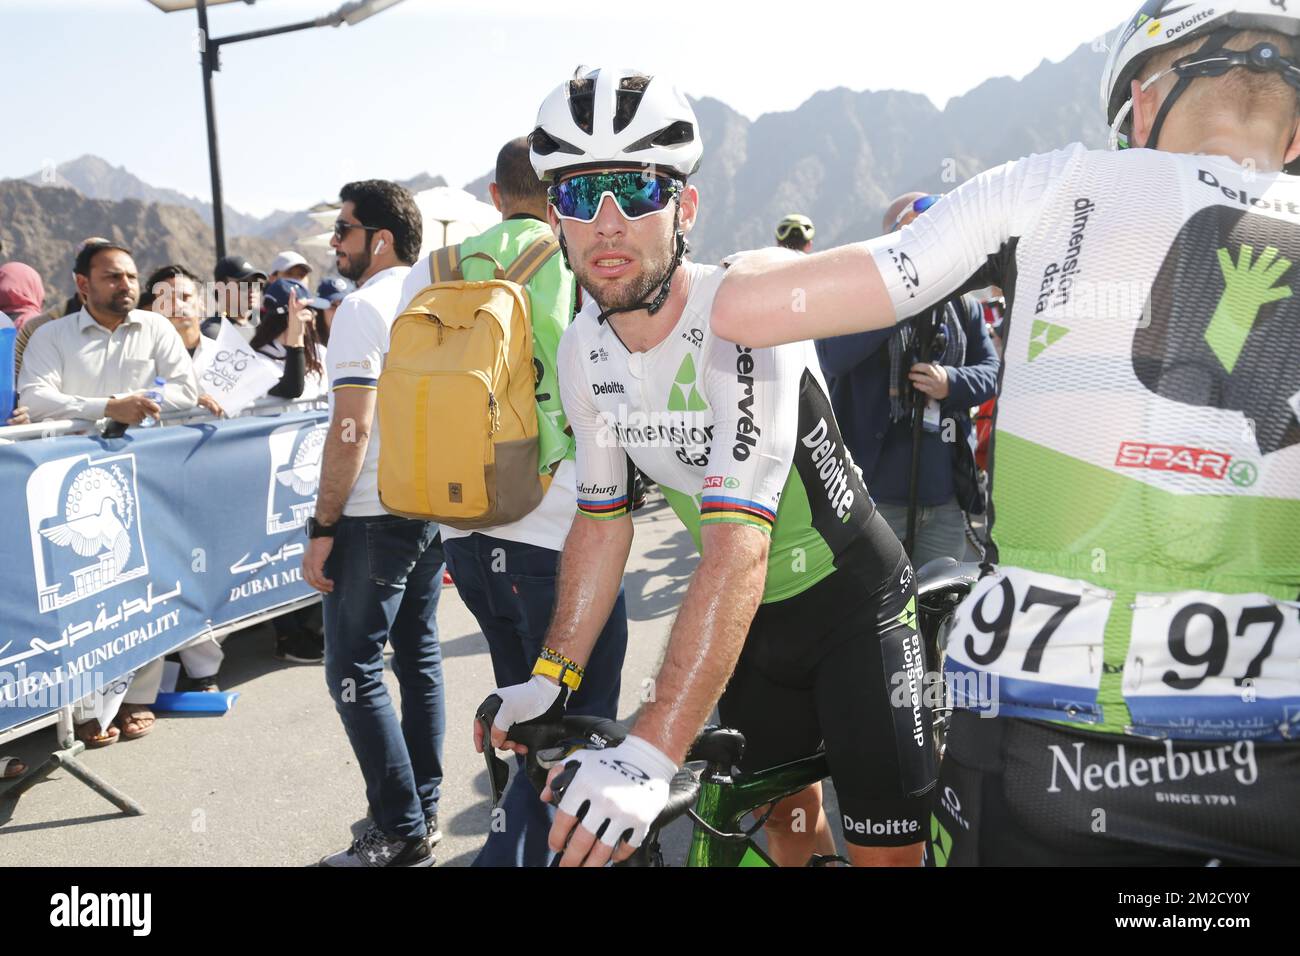 British Mark Cavendish of Team Dimension Data pictured after stage 4 of the Dubai Tour 2018 cycling race, 172km from Dubai to Hatta Dam, United Arab Emirates, Friday 09 February 2018. The Dubai Tour 2018 is taking place from 6 to 10 February. BELGA PHOTO YUZURU SUNADA Stock Photo